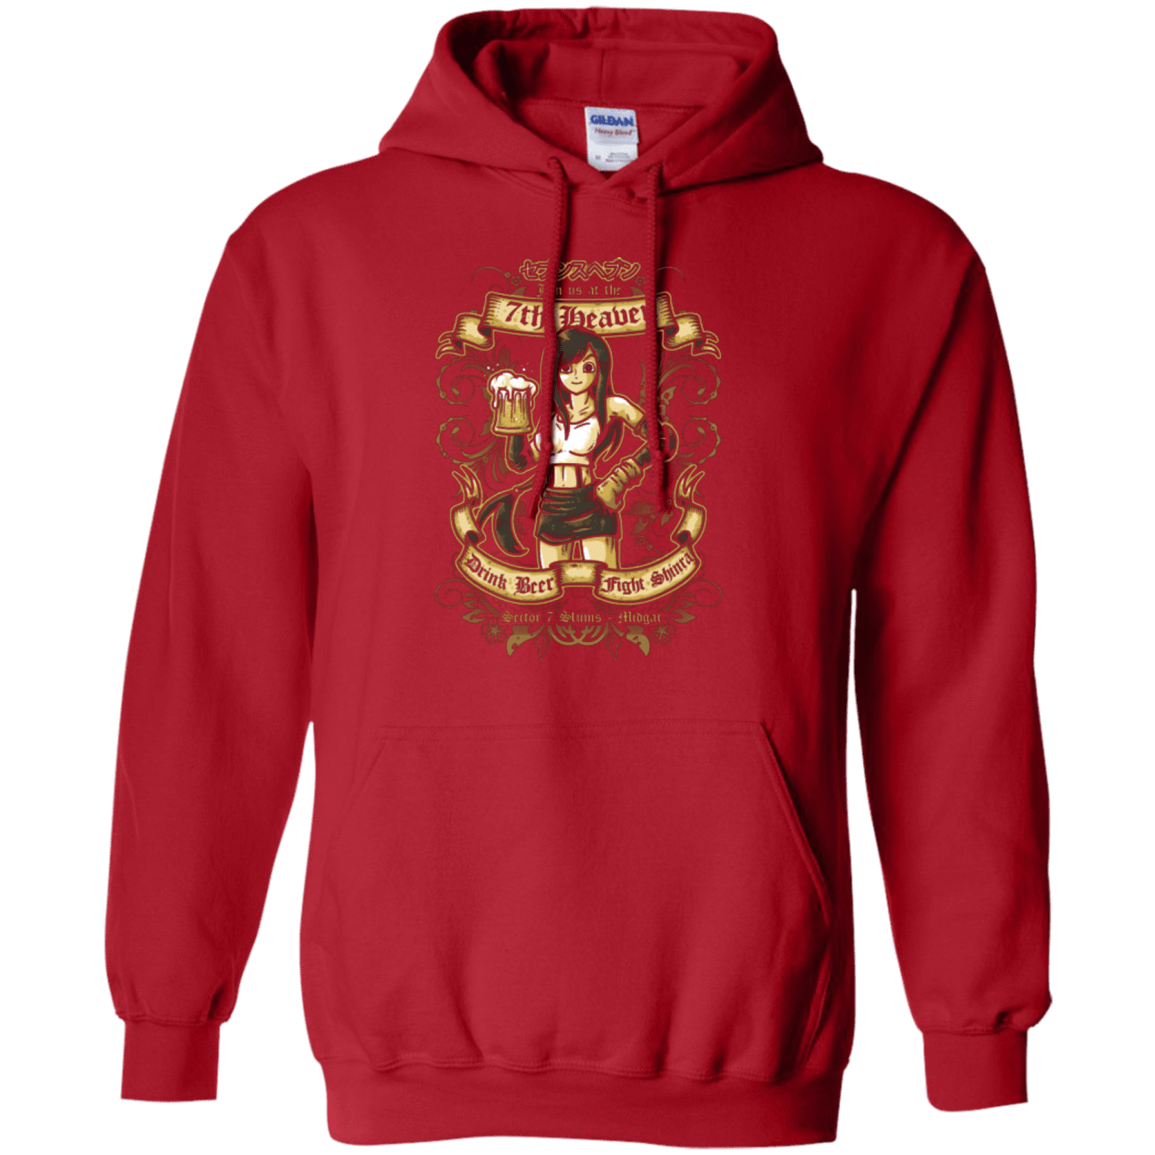 Sweatshirts Red / Small 7TH HEAVEN Pullover Hoodie